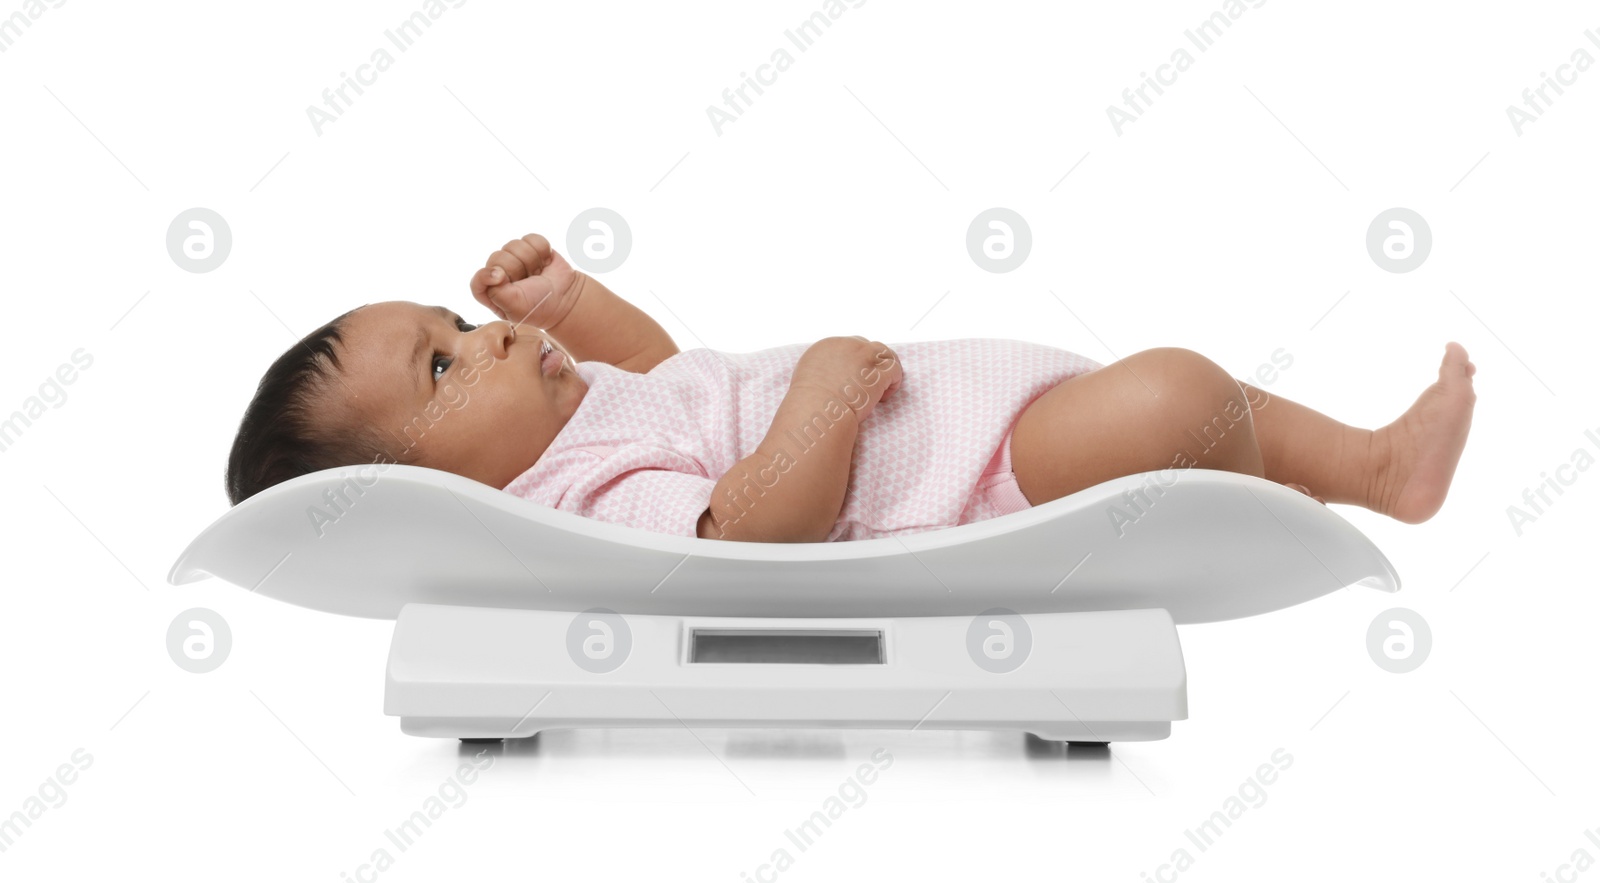 Photo of African-American baby lying on scales against white background